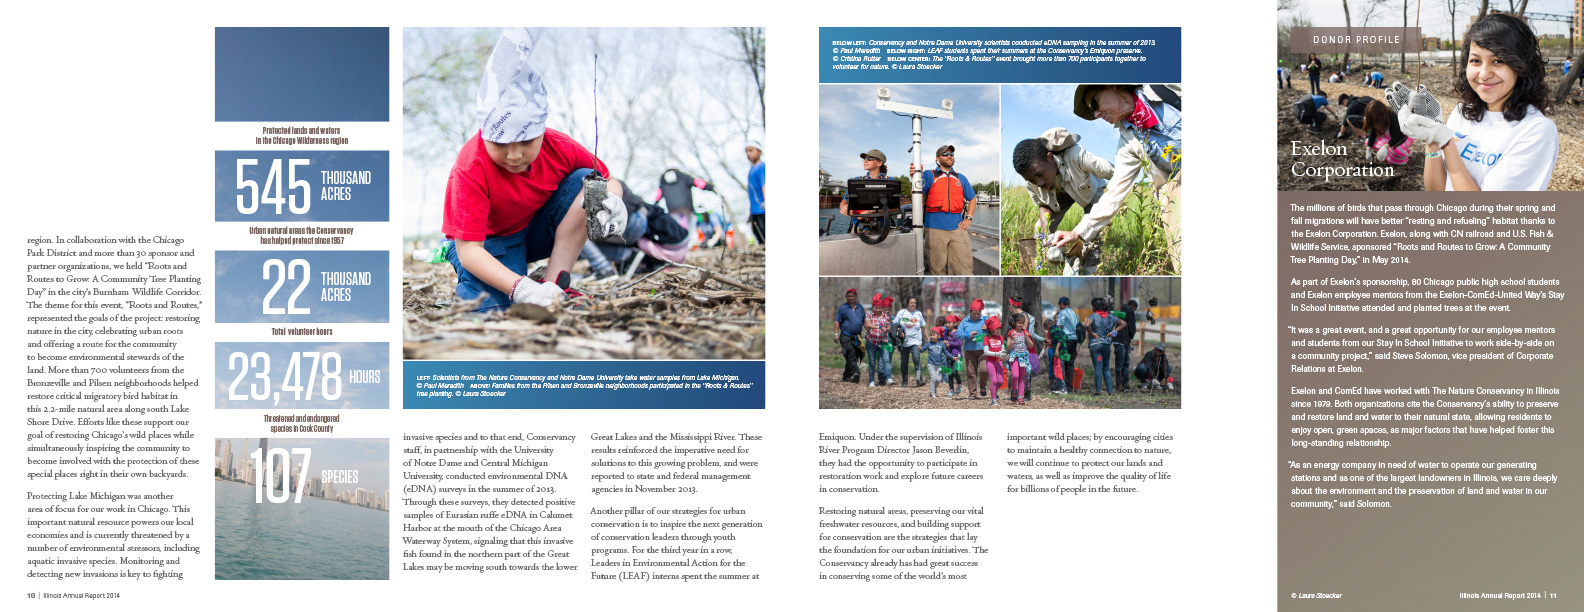 Seventh spread from the 2015 annual report